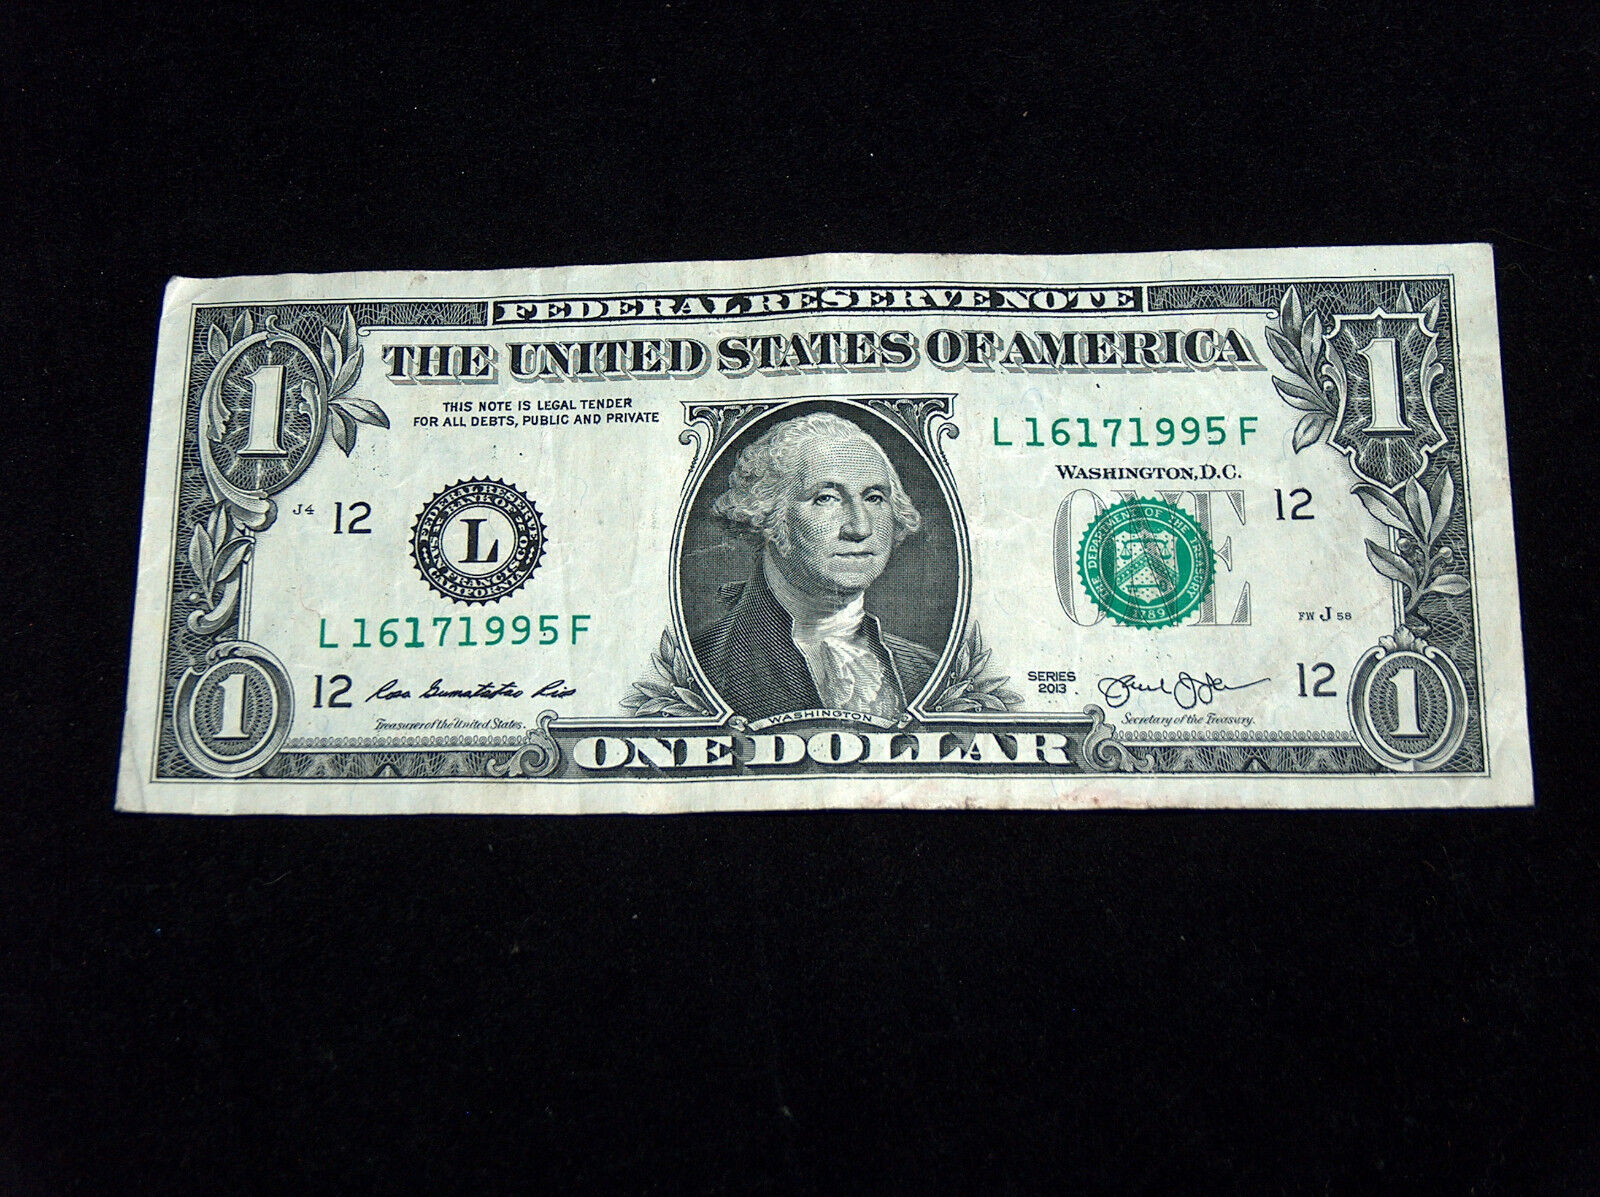 2013 Dollar Super sale Ranking integrated 1st place Bill US Bank Note Date Birthday 1617 Year Fancy 1995